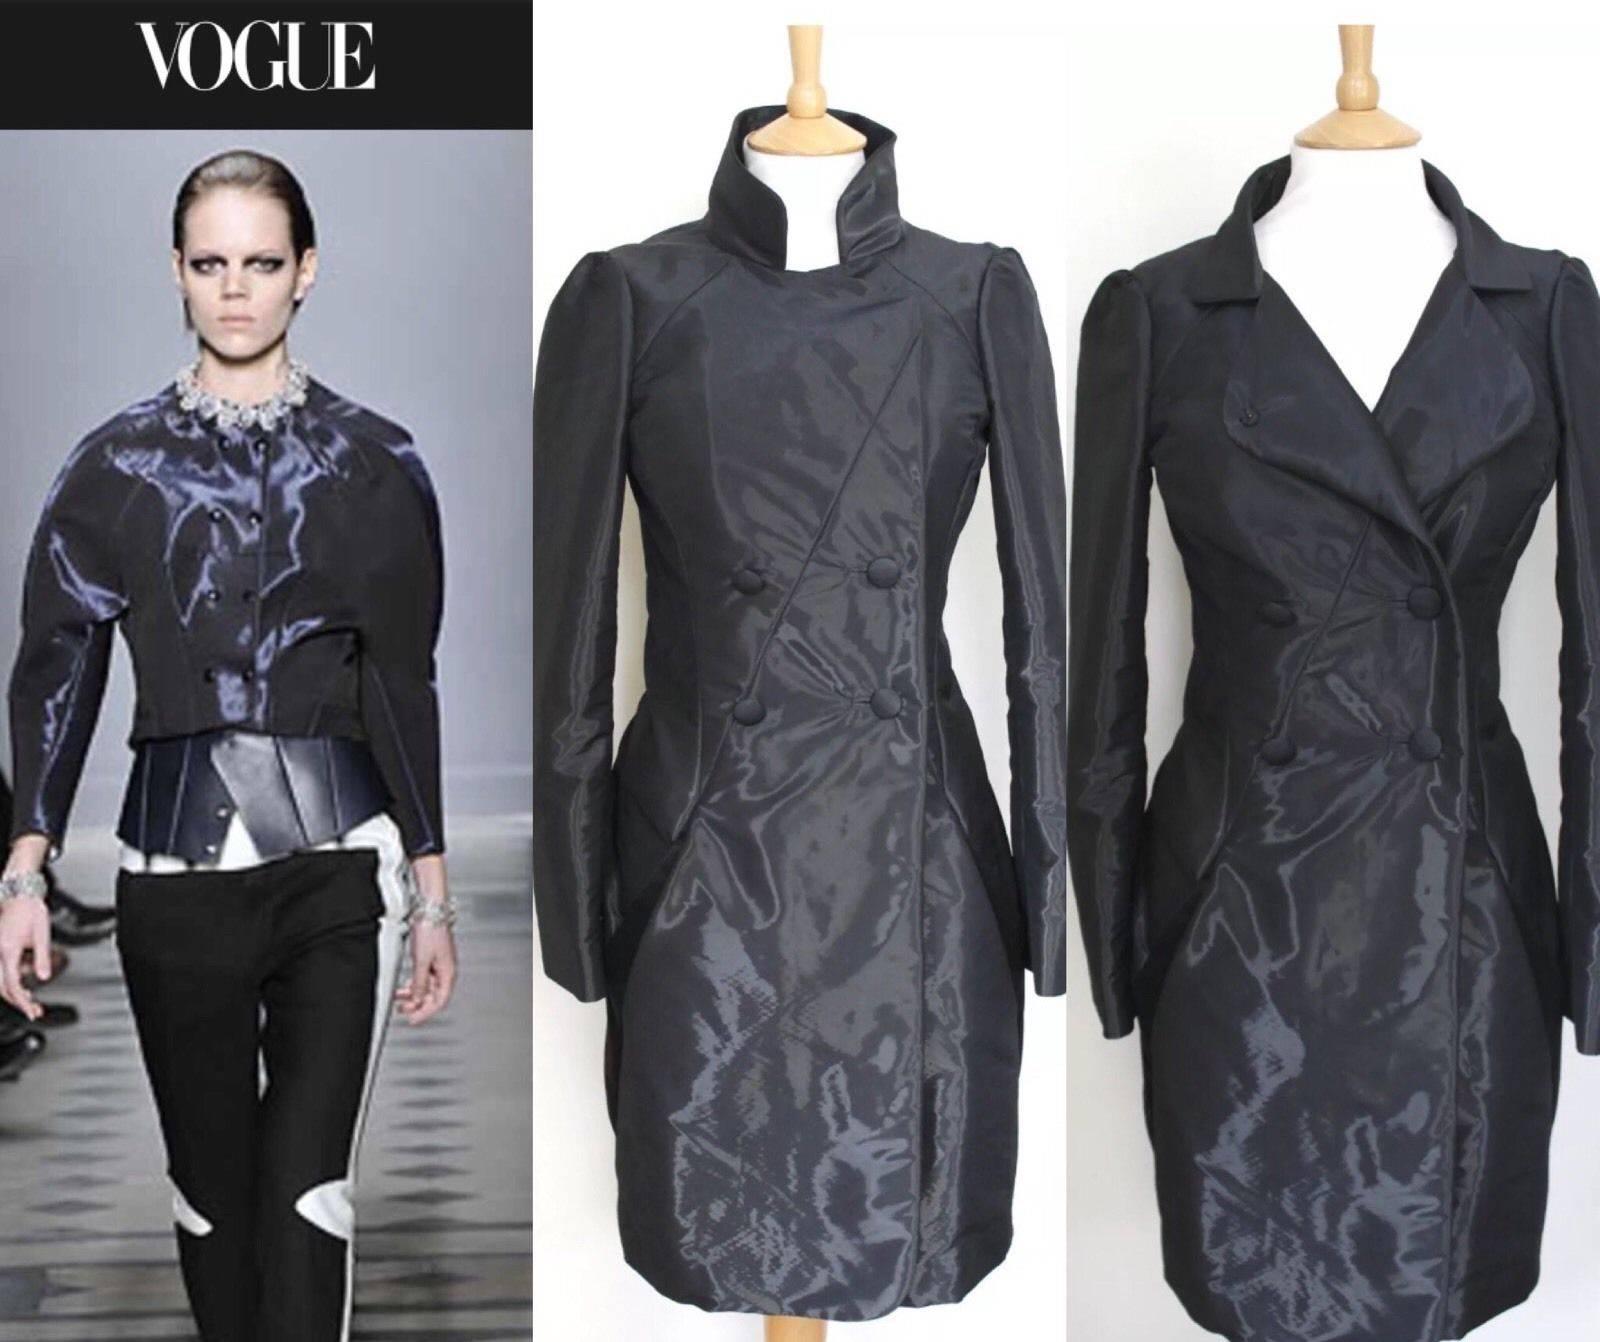 Balenciaga Shiny Wet Look Navy Structured Coat UK 8
This is an iridescent coat from Fall 2008 Collection designed by Nicolas Ghesquière
Lightly padded navy double-breasted iridescent coat with dual pockets at hips and front closures.
Gathered at